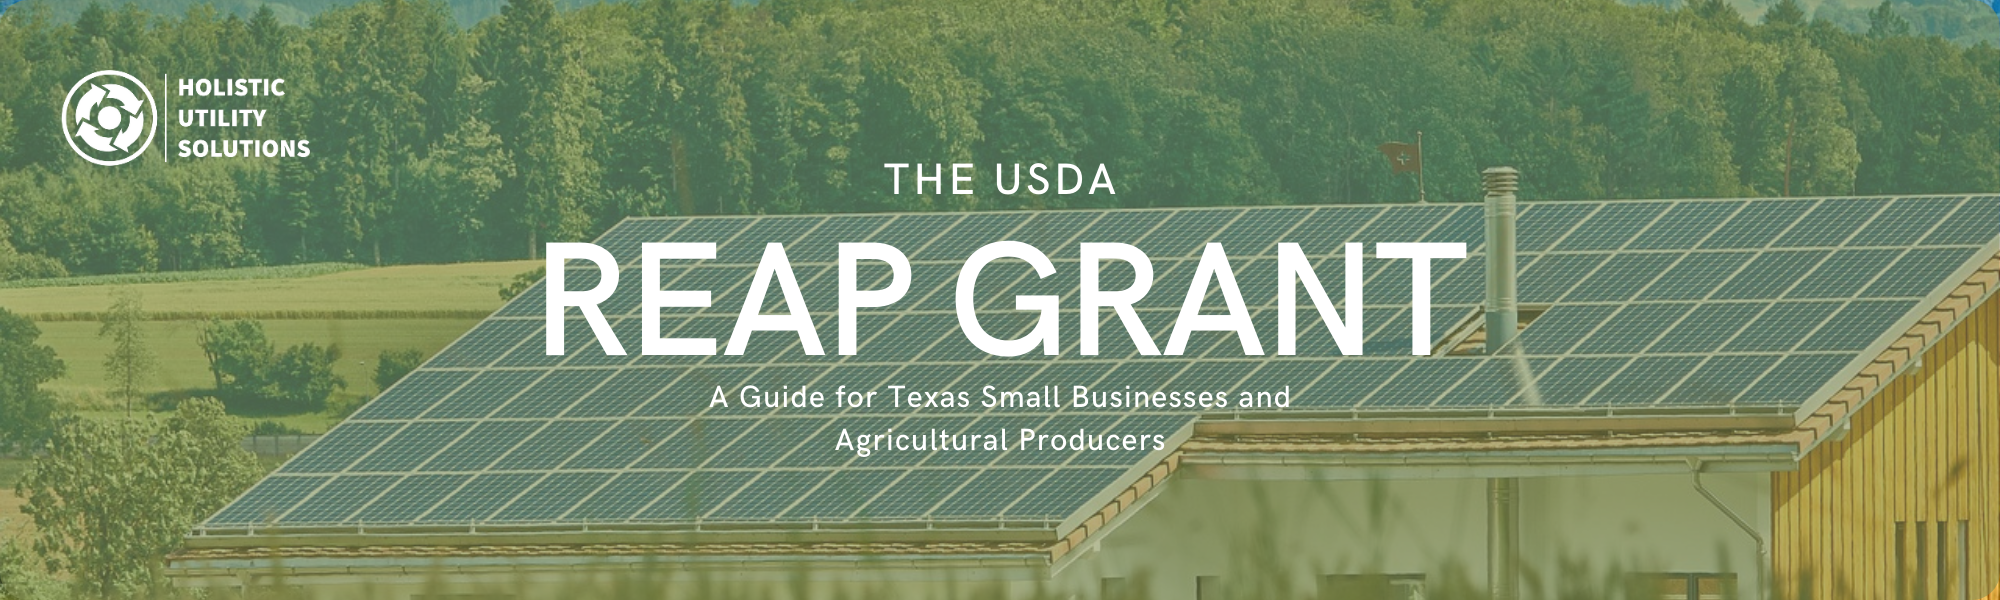 USDA REAP Grant Guide for Texas Small Businesses and Agricultural Producers